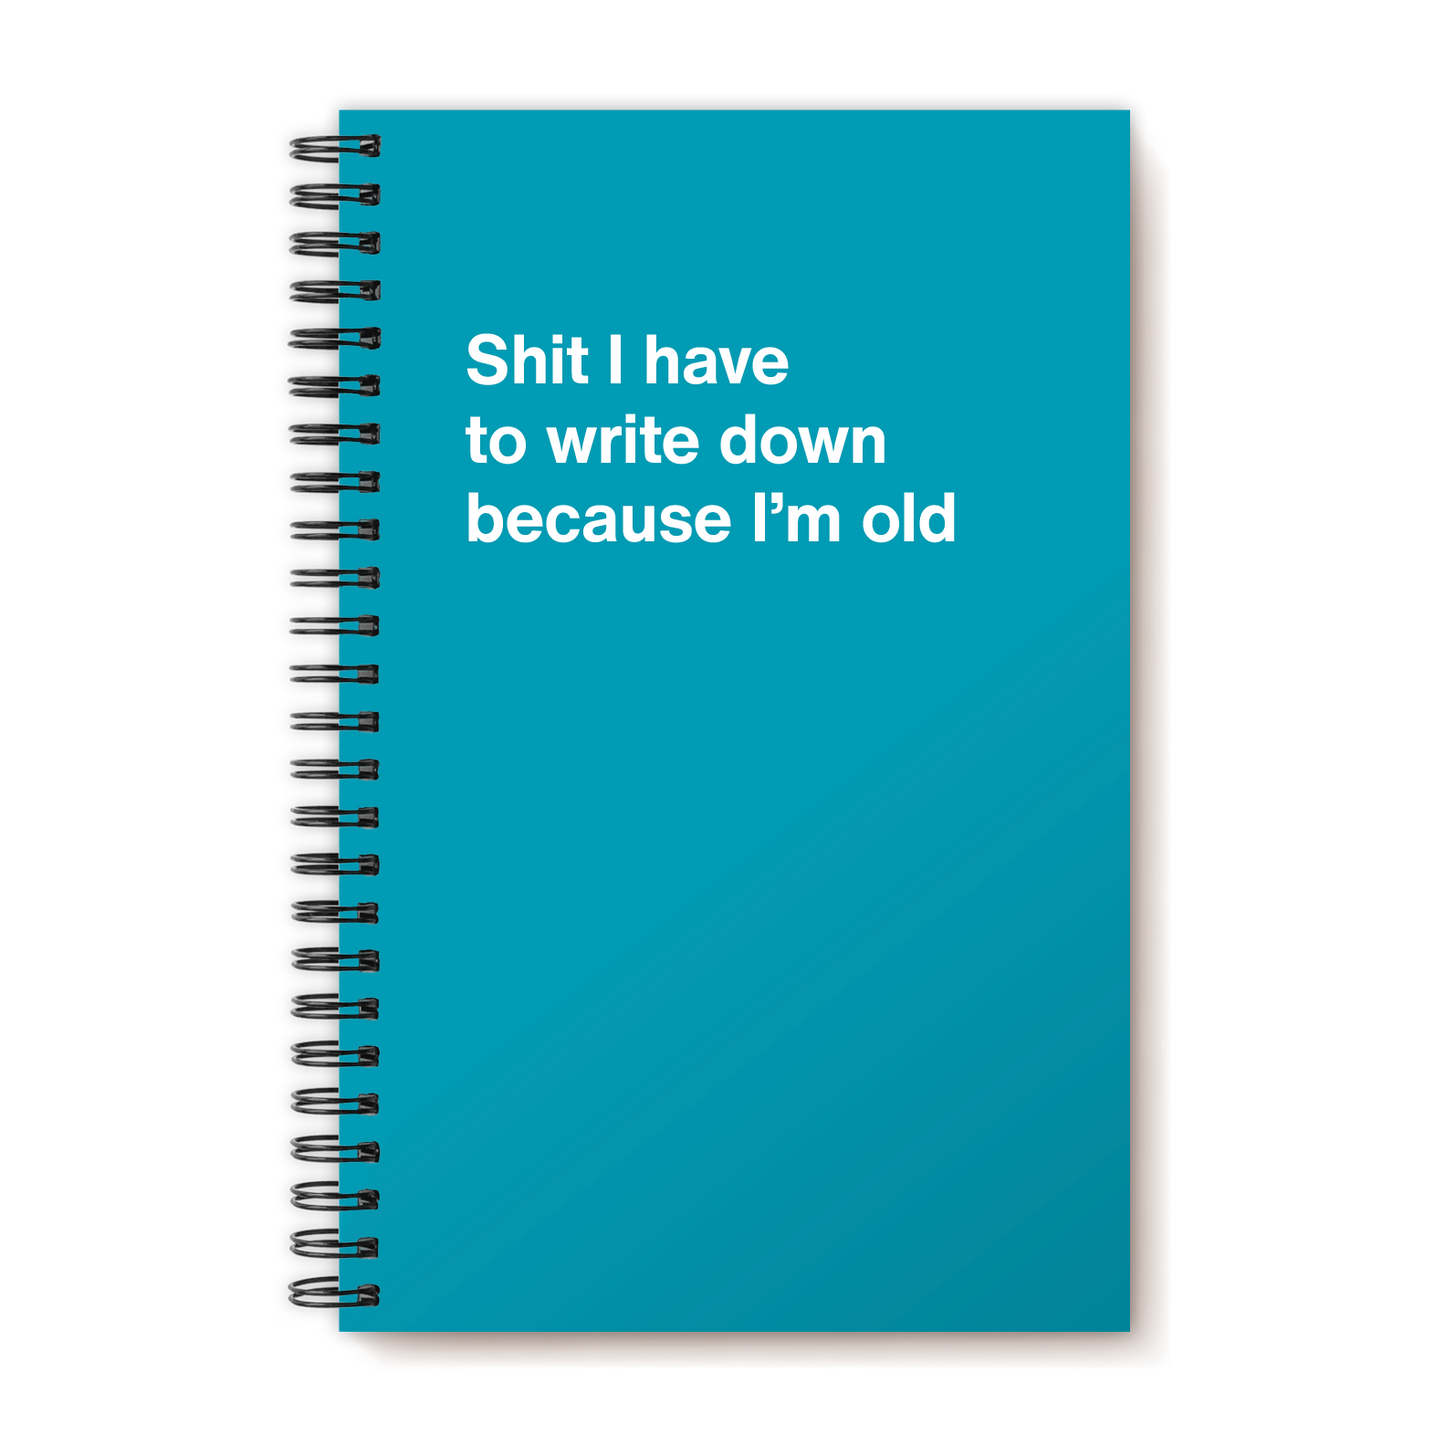 Shit I have to write down because I’m old | WTF Notebooks